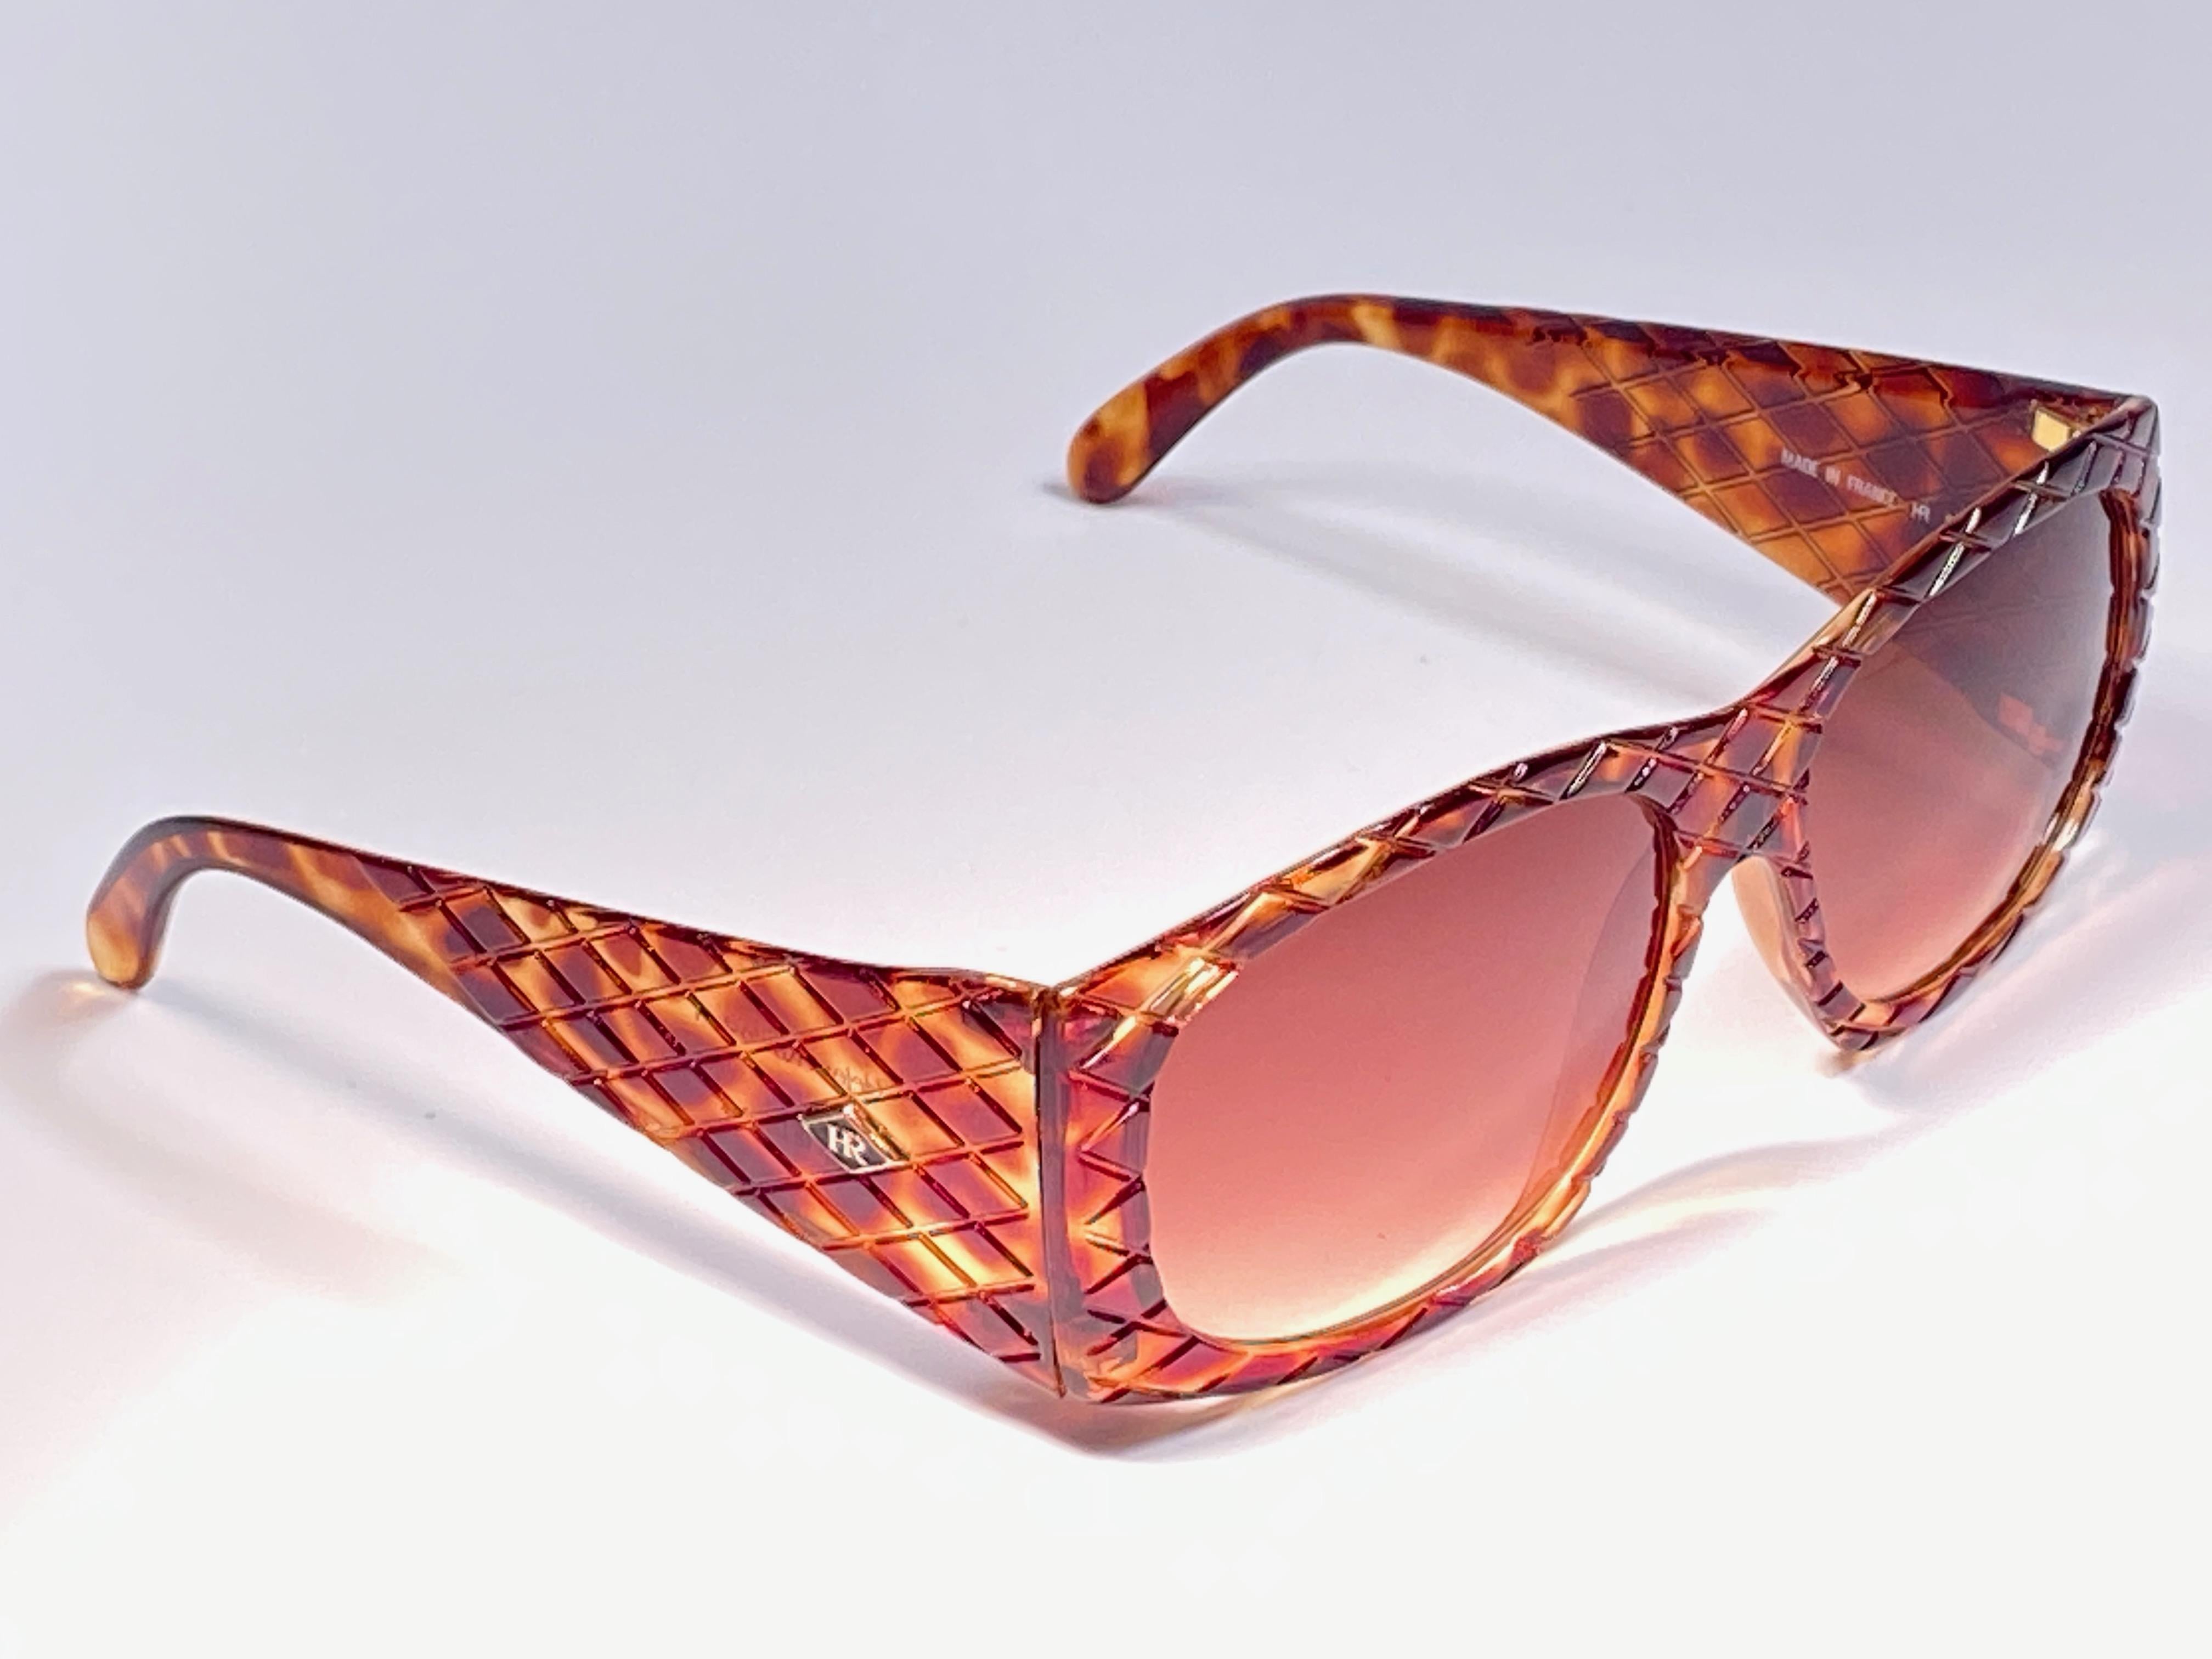 Vintage Helena Rubinstein Tortoise Quilted Sunglasses France In Excellent Condition For Sale In Baleares, Baleares